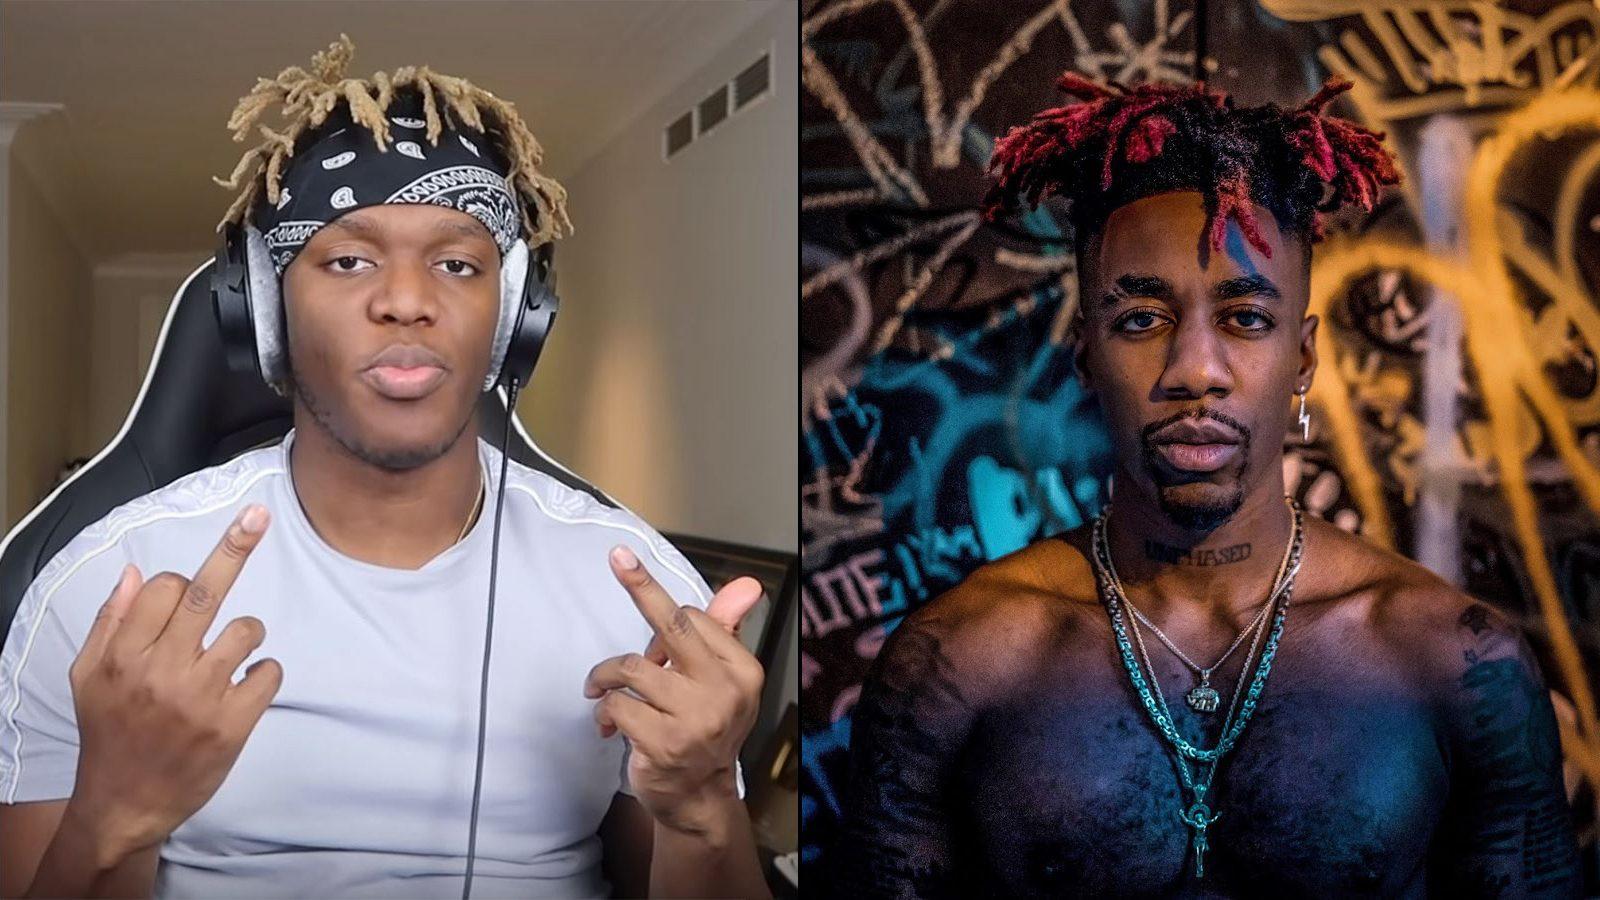 Ksi And Rapper Dax Arrange Boxing Match During Heated.